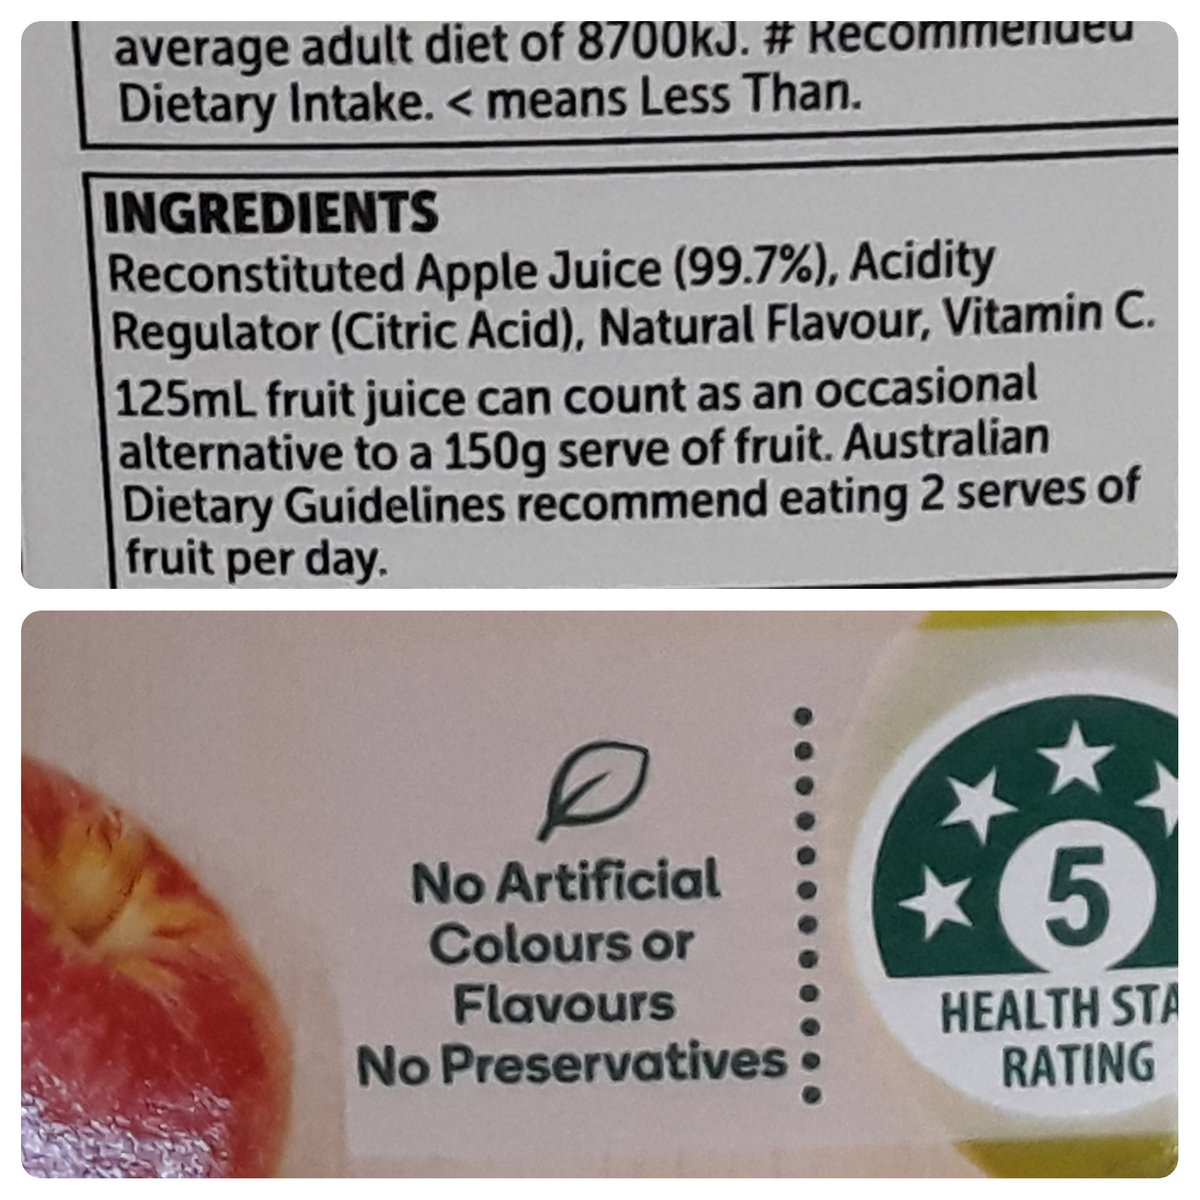 This is very important! The apple juice MUST use acidity regulator instead of preservatives. If you use apple juice with preservatives, you're gonna have a bad time.